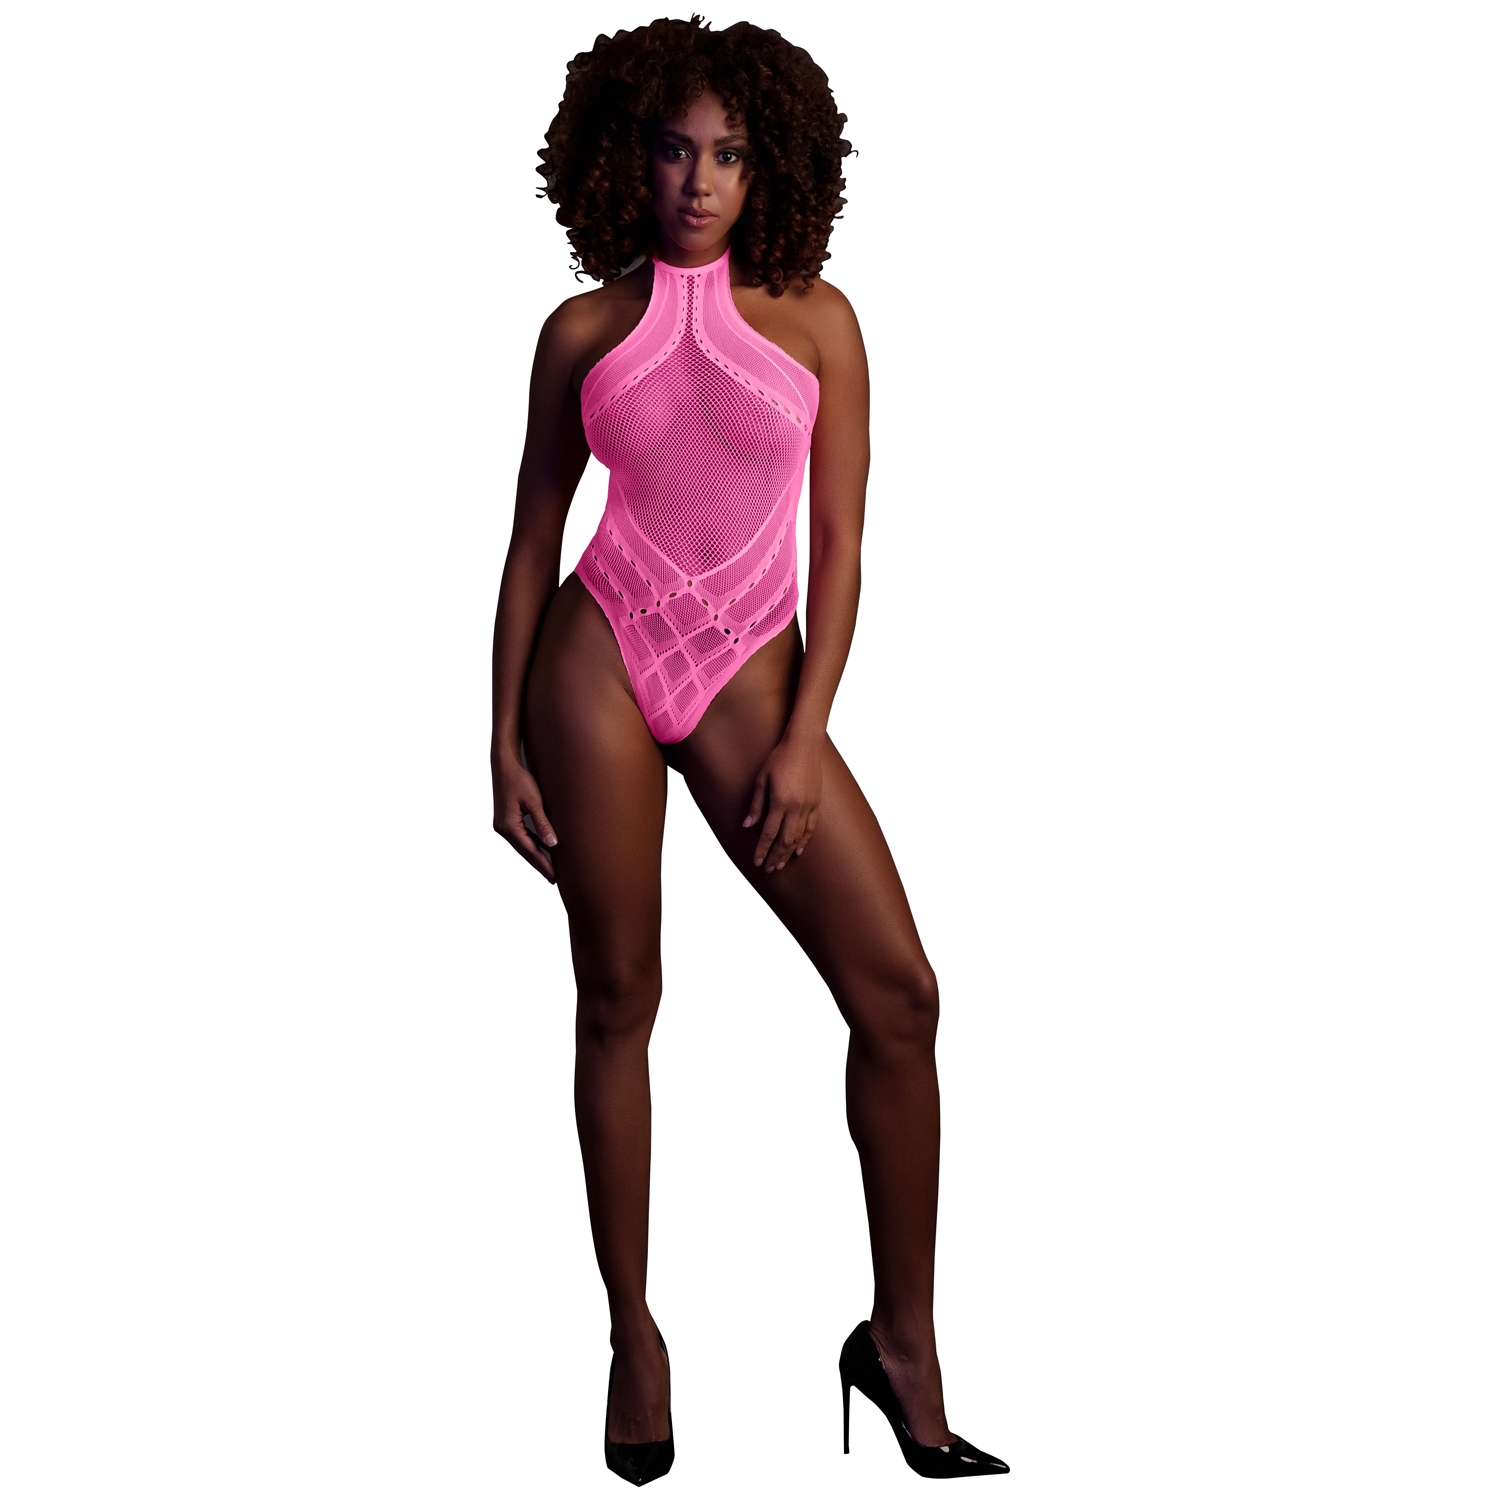 Ouch! Glow in the Dark Neon Pink Body - Pink - One Size